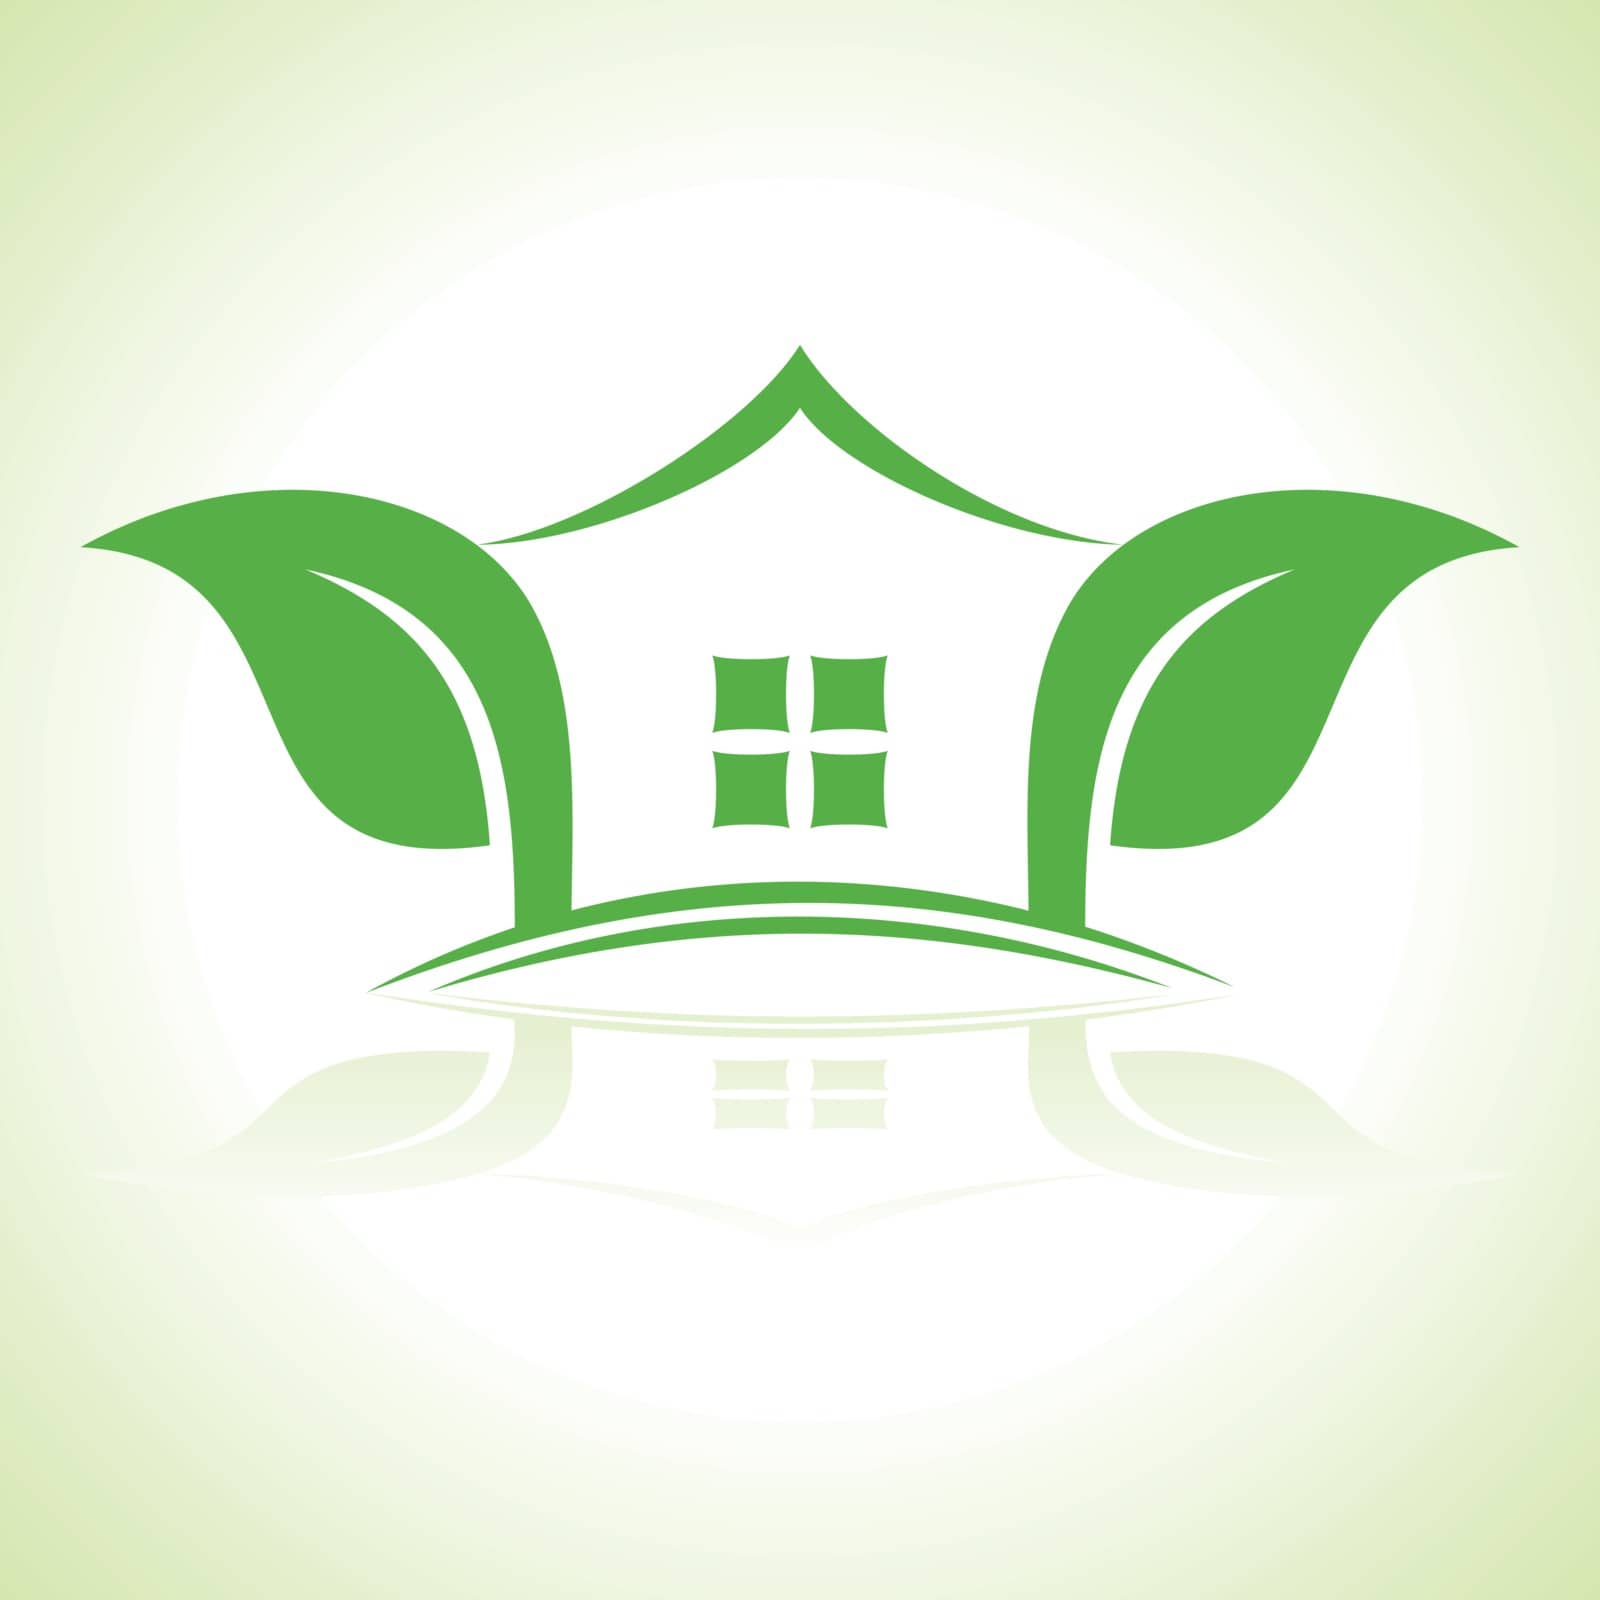 Eco home icon with leaf vector illustration